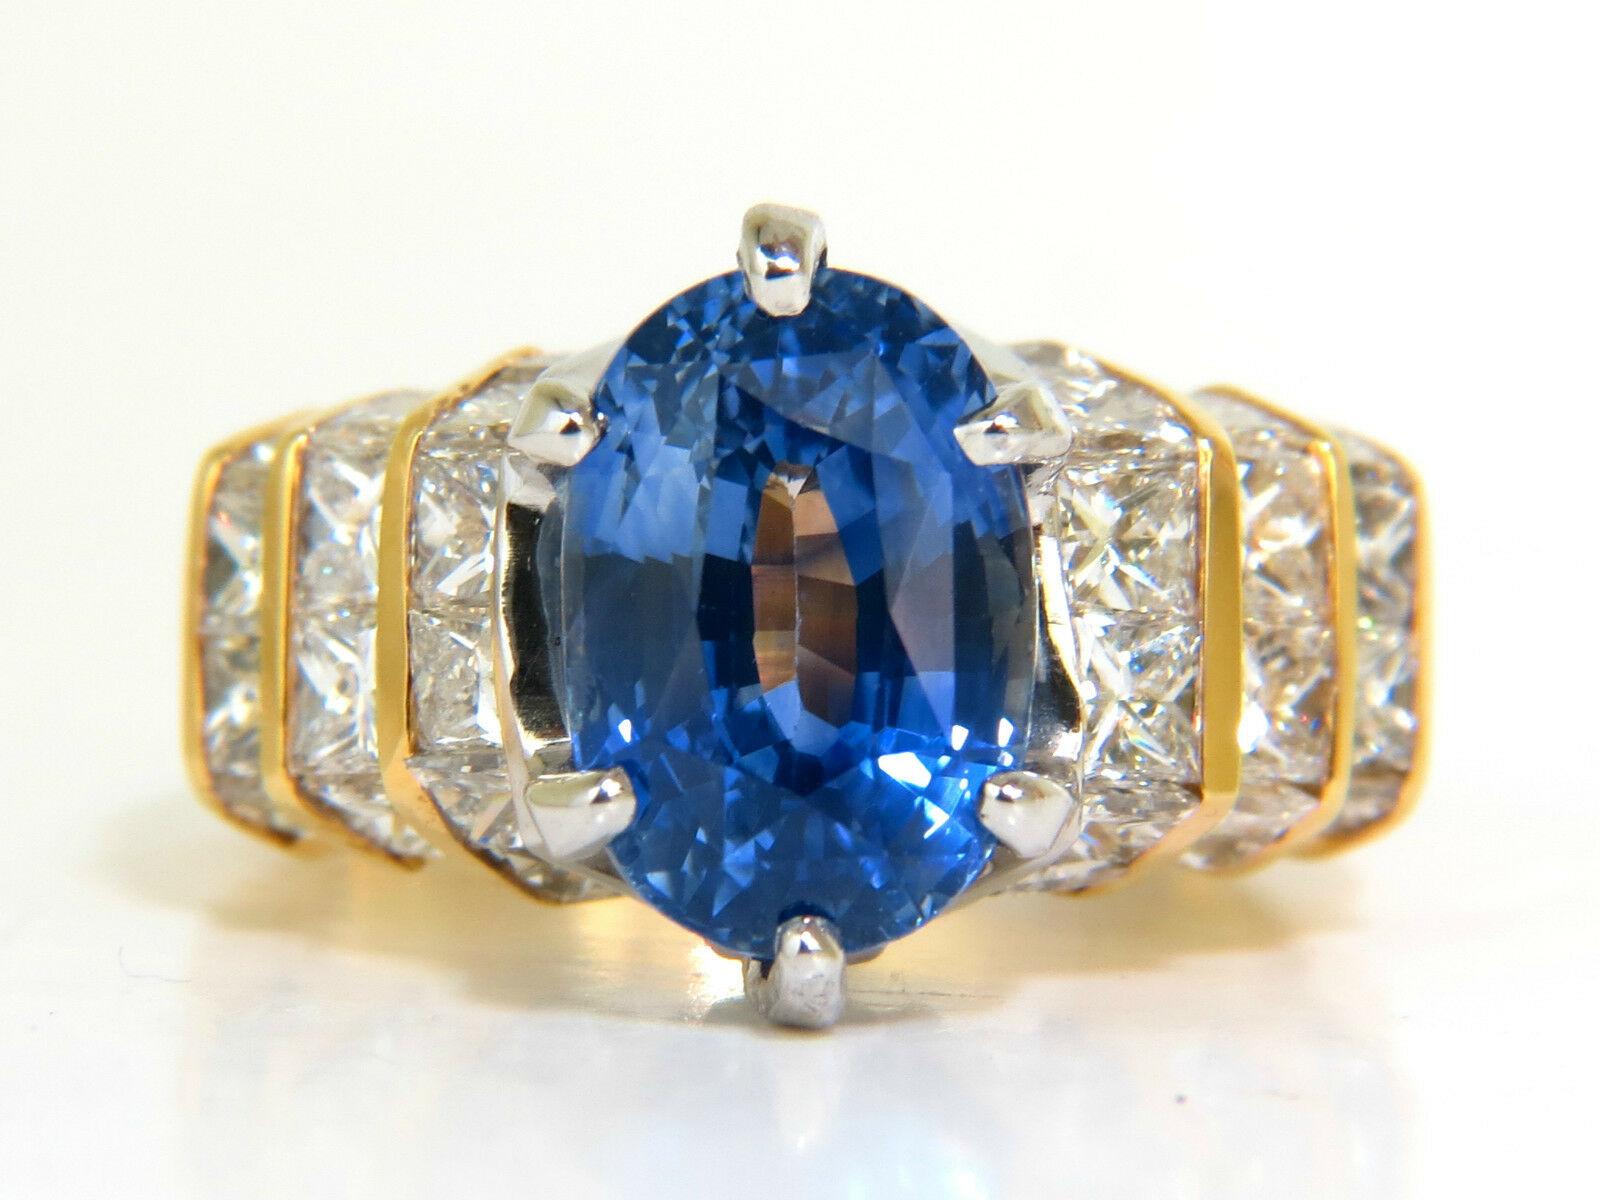 5.89ct. GIA certified Natural Sapphire Ring
Amazing Oval cut

Very Very Clean Clarity

Beautiful Blue sparkles throughout

The classic cornflower color

11.43 X 7.86 X 6.82mm

Transparency A+

GIA: 